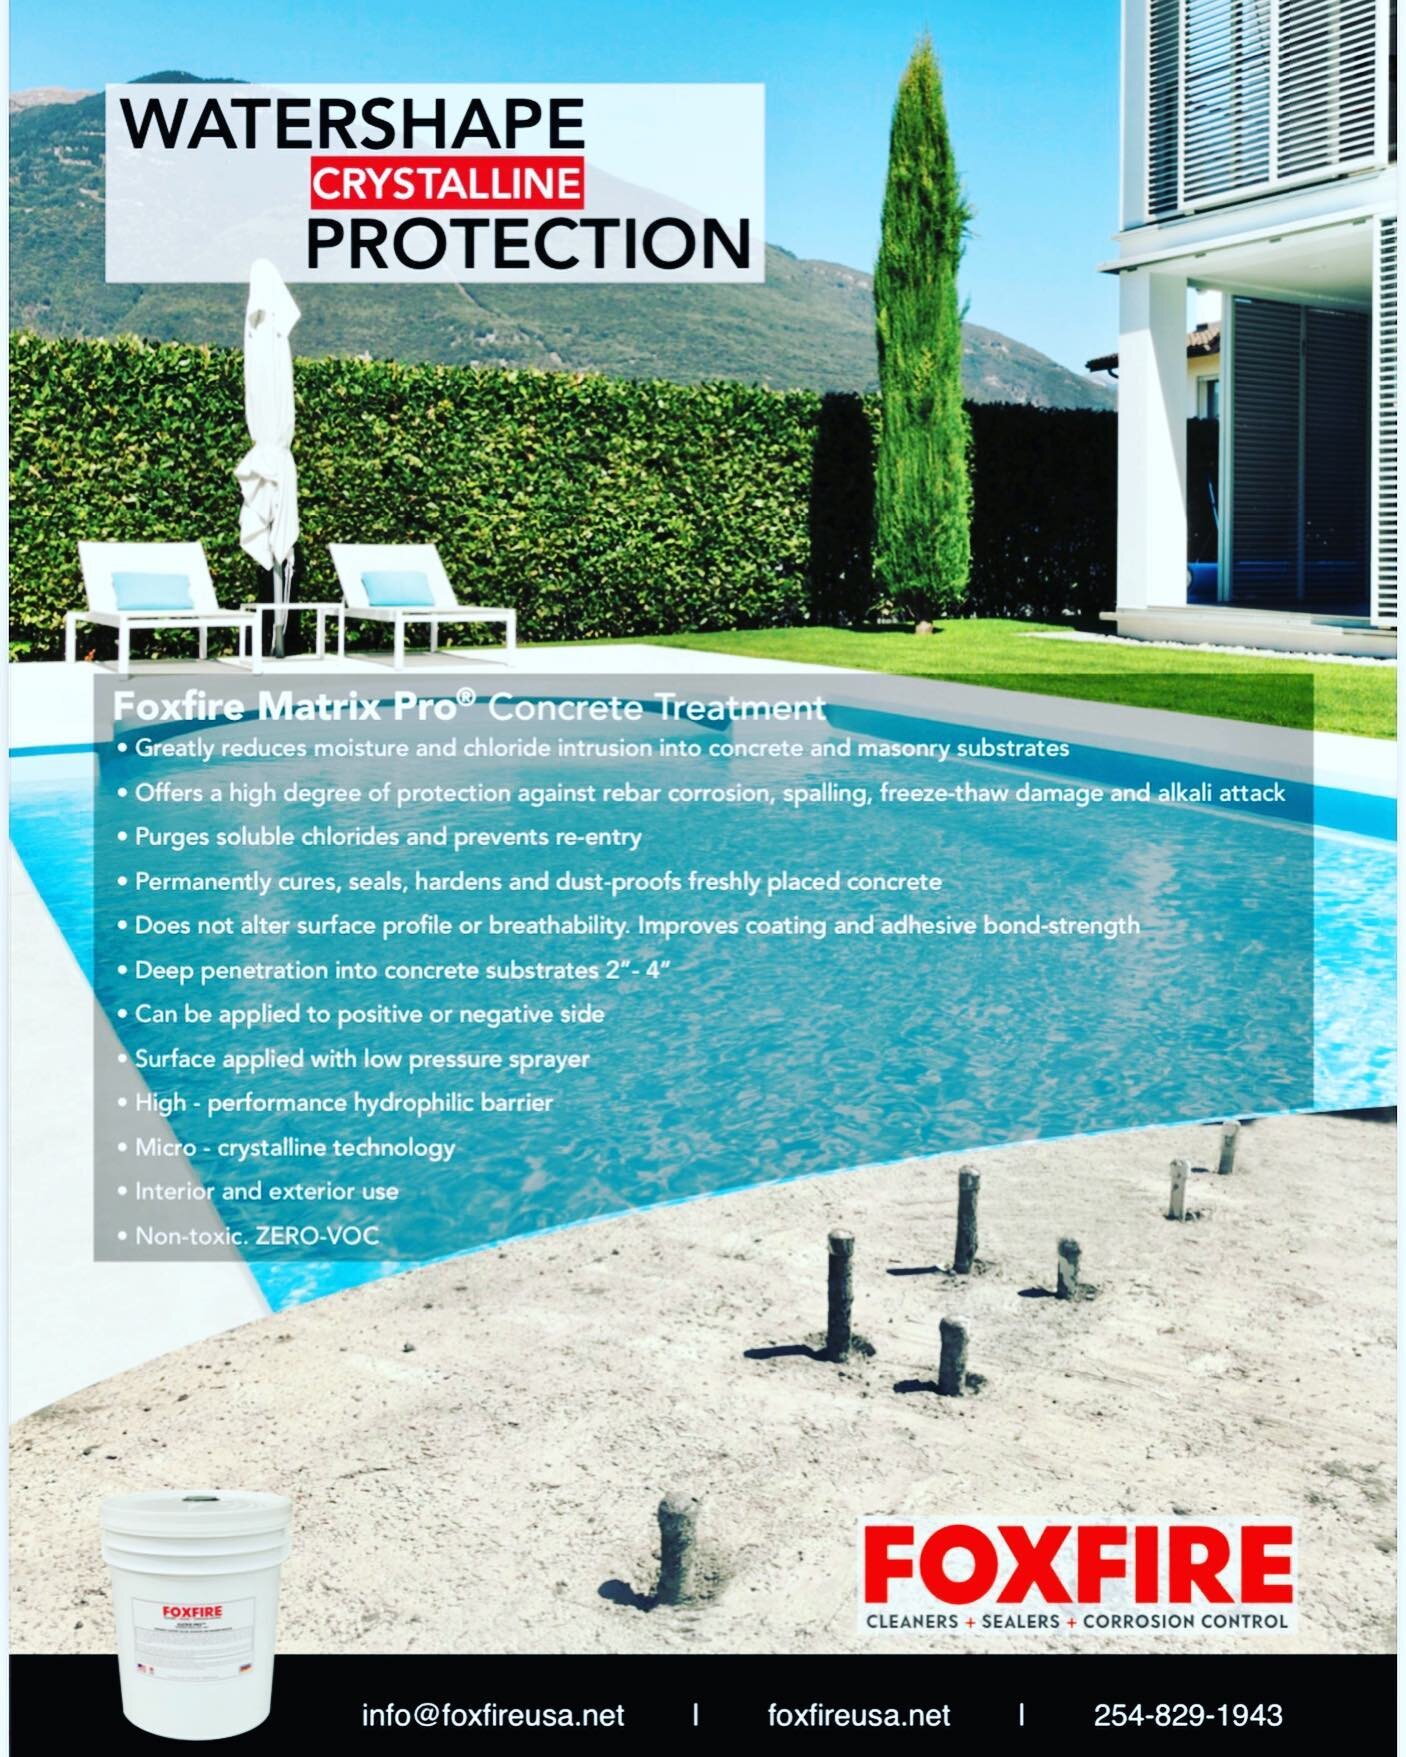 Reduce soluble chlorides and other transport properties like vapor and gases internally while protecting embedded steel from long term corrosion with Foxfire Matrix Pro&reg;! For all shotcrete, gunite, and concrete vaults! #foxfirematrixpro #poolands